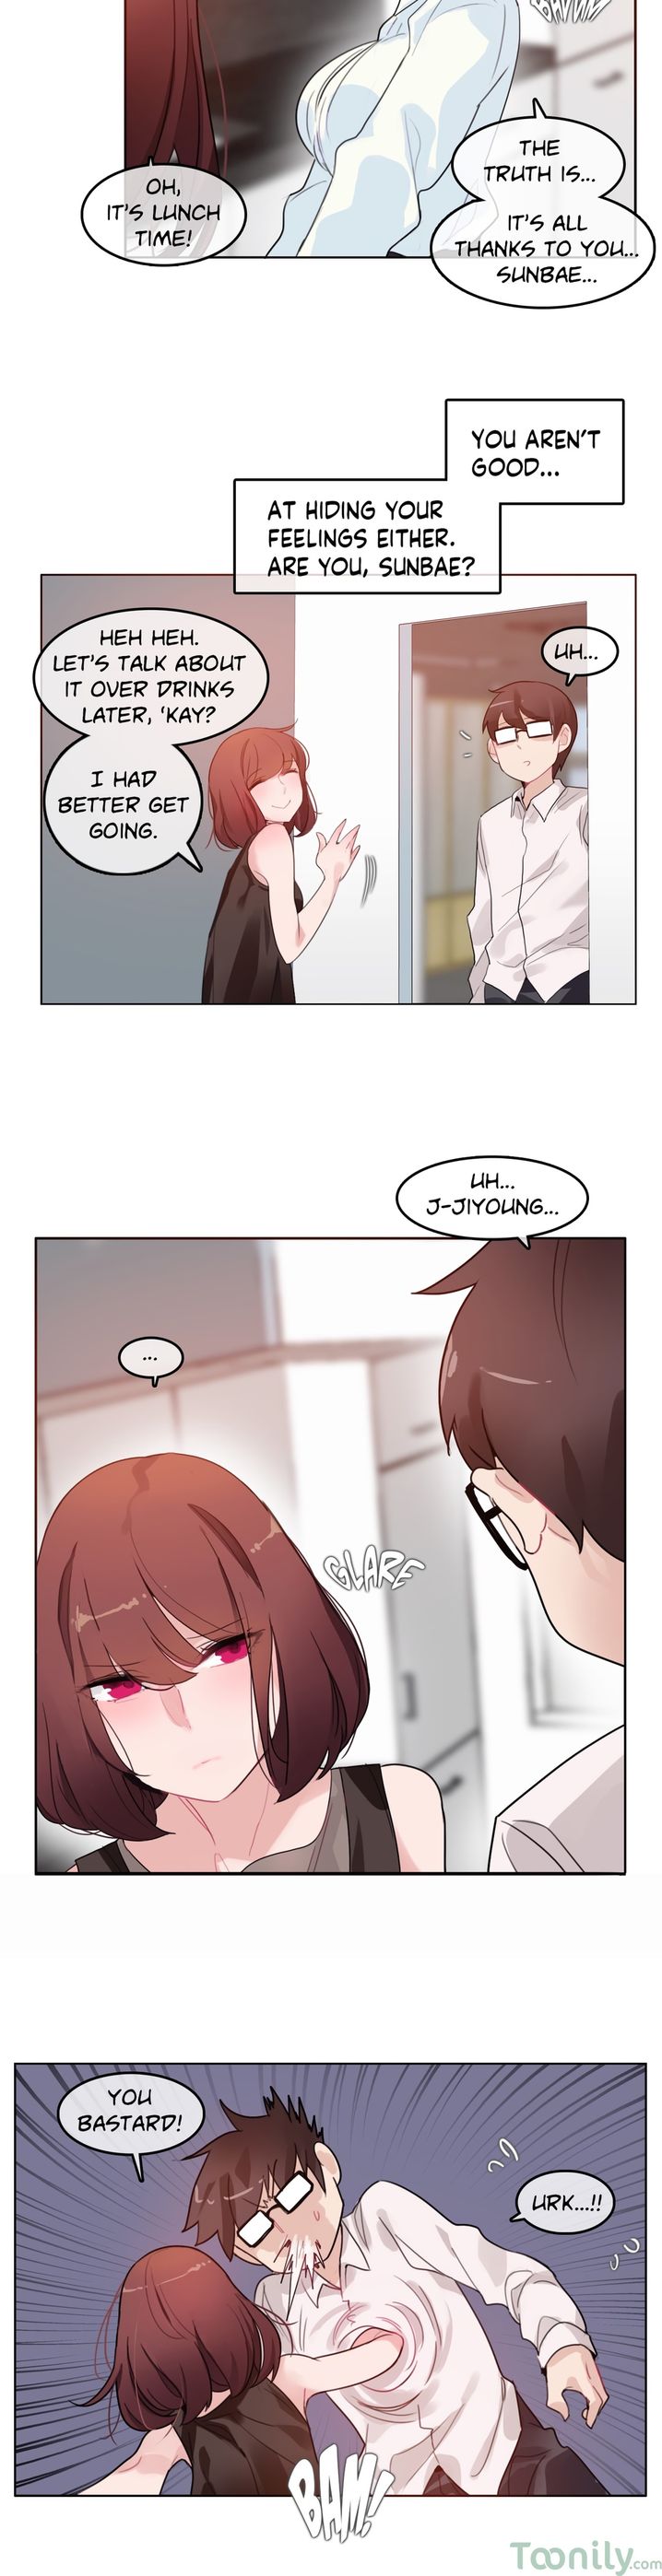 A Pervert’s Daily Life - Chapter 32 Page 9